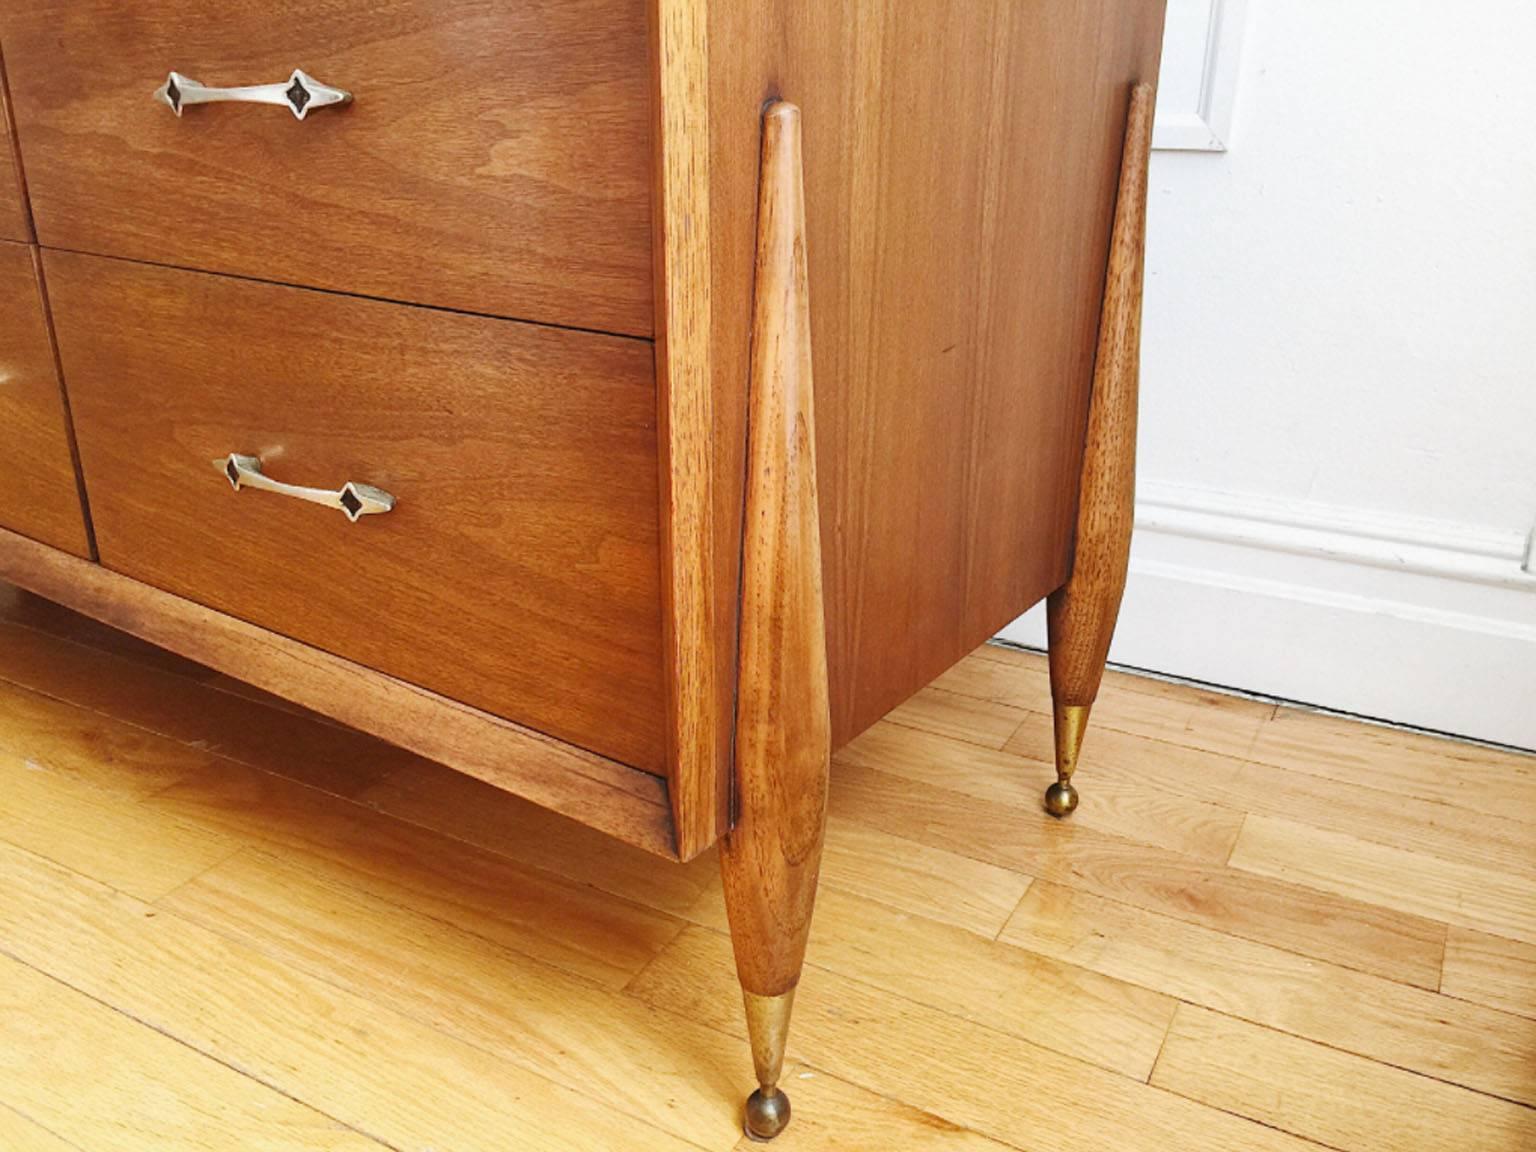 Danish-inspired, Mid-Century Modern lowboy triple dresser, credenza or sideboard from Kent Coffey's 'The Auburn' line. Original pulls, brass feet and walnut wood. In excellent vintage condition, drawers are all clean and slide easily. One minor